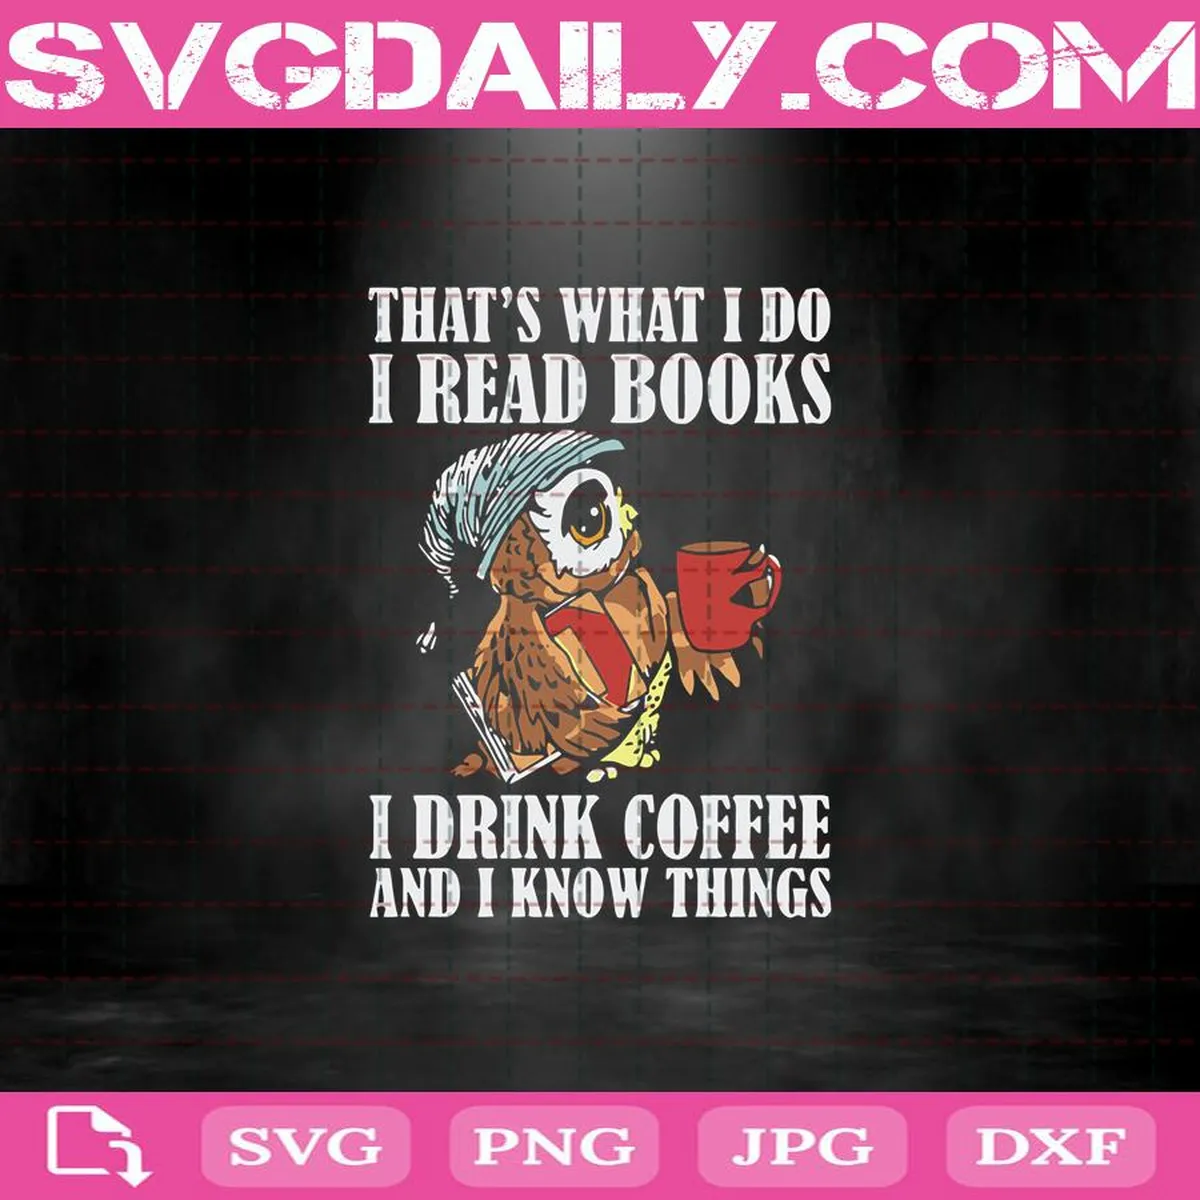 That's What I Do I Read Books Svg, I Drink Coffee Pullover Svg, Books And Coffee Svg, Drinking Svg, Books And Coffee Svg, Coffee Svg